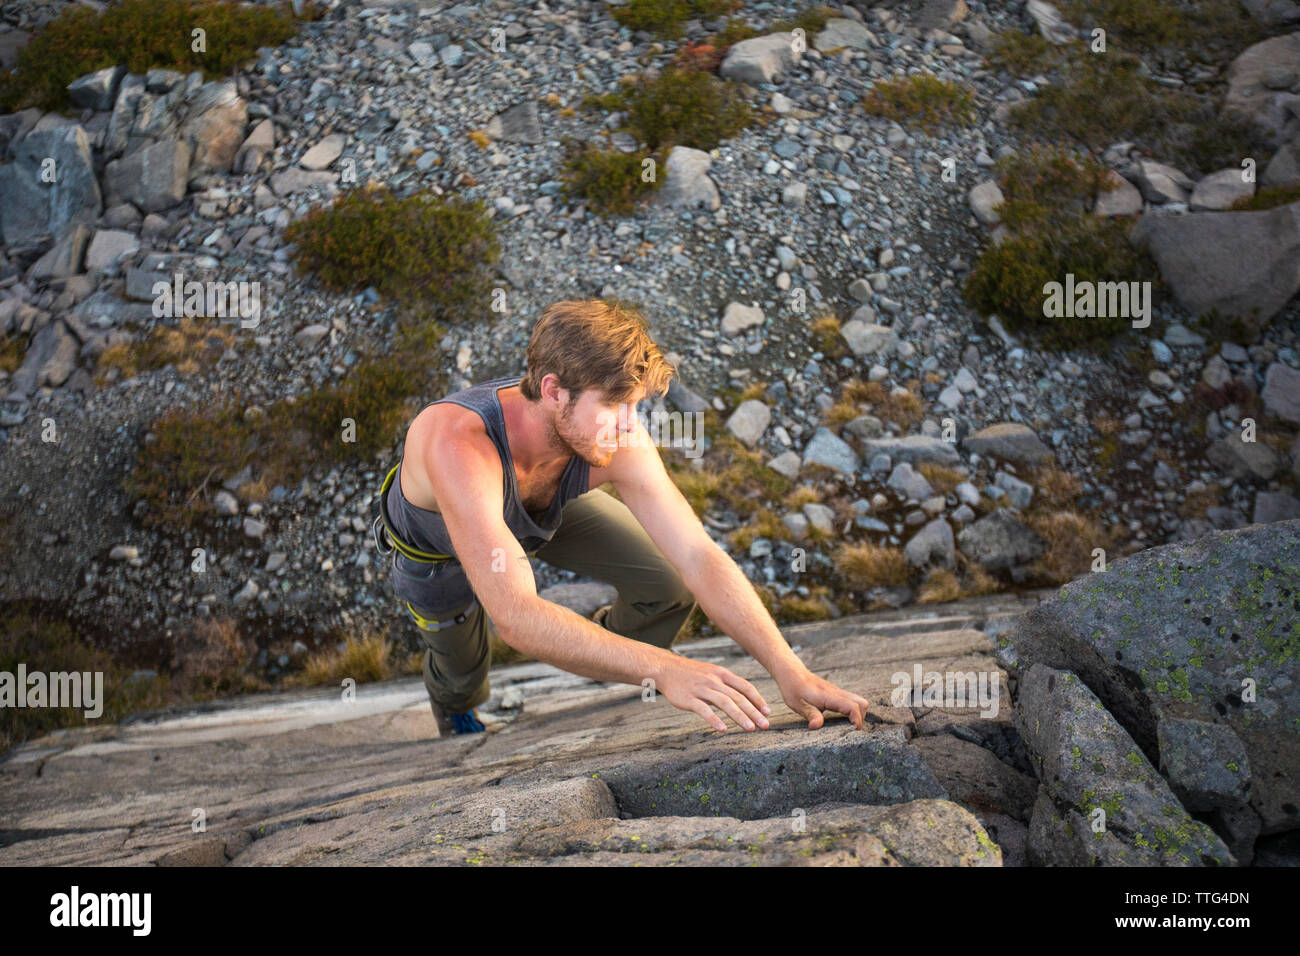 High angle view of millennial man bouldering on rock face outdoors. Stock Photo